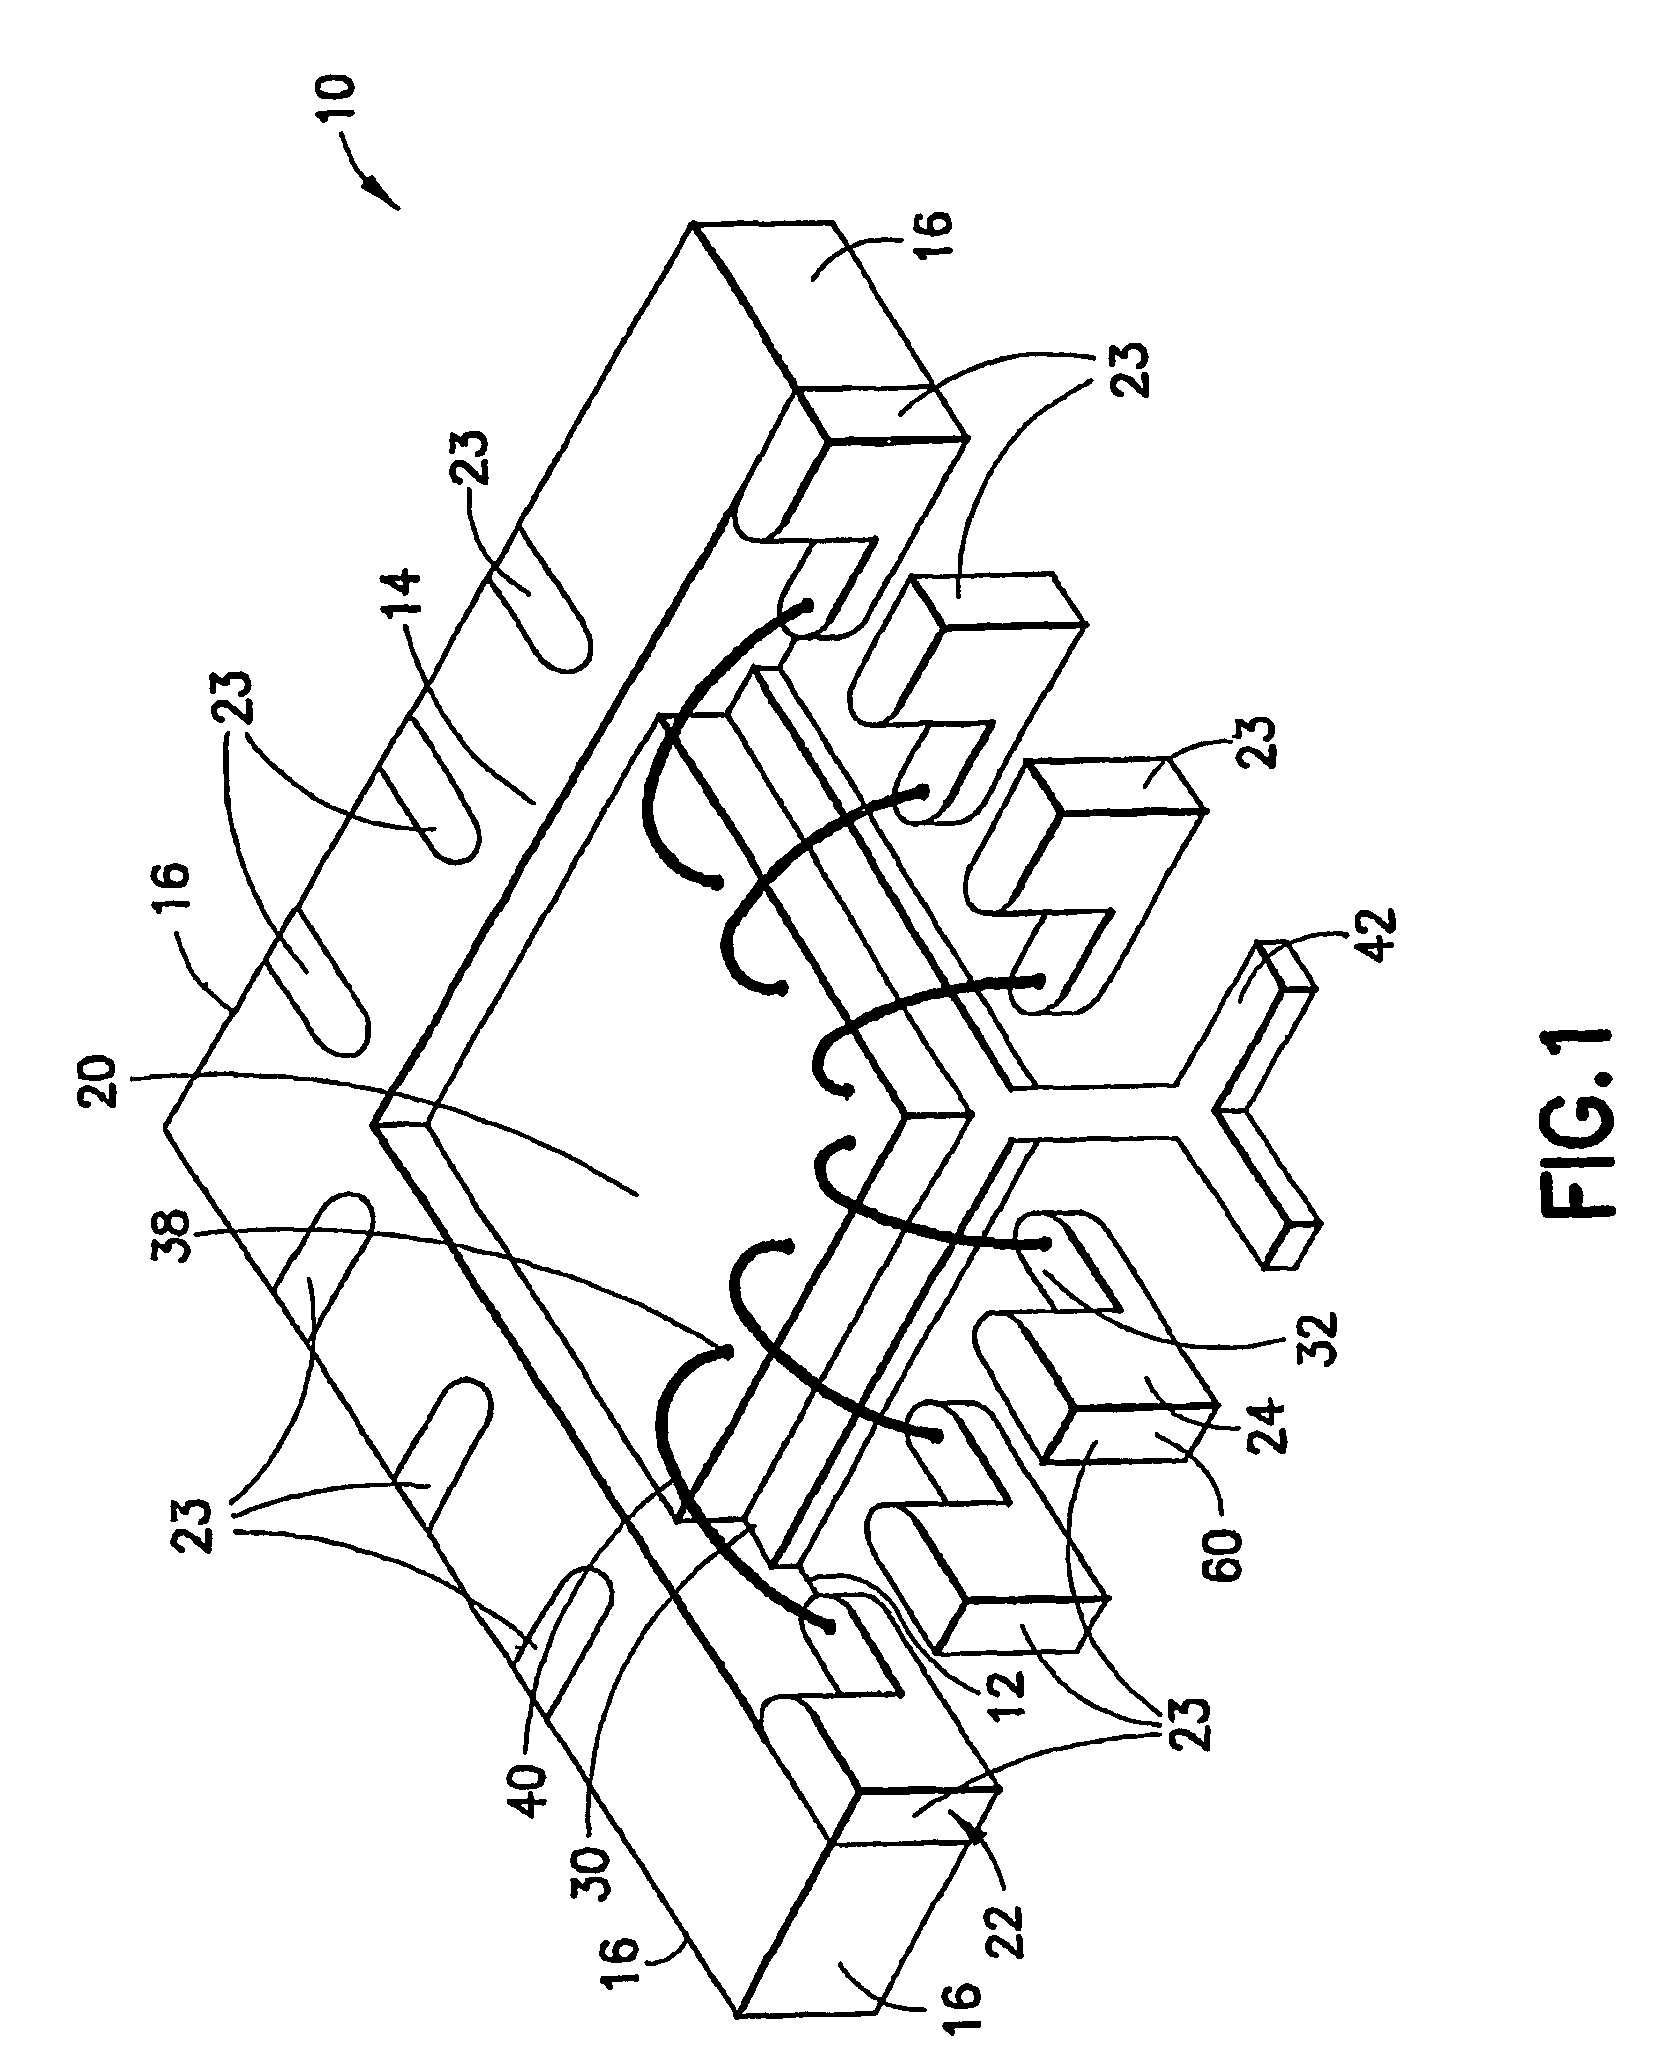 Reversible leadless package and methods of making and using same